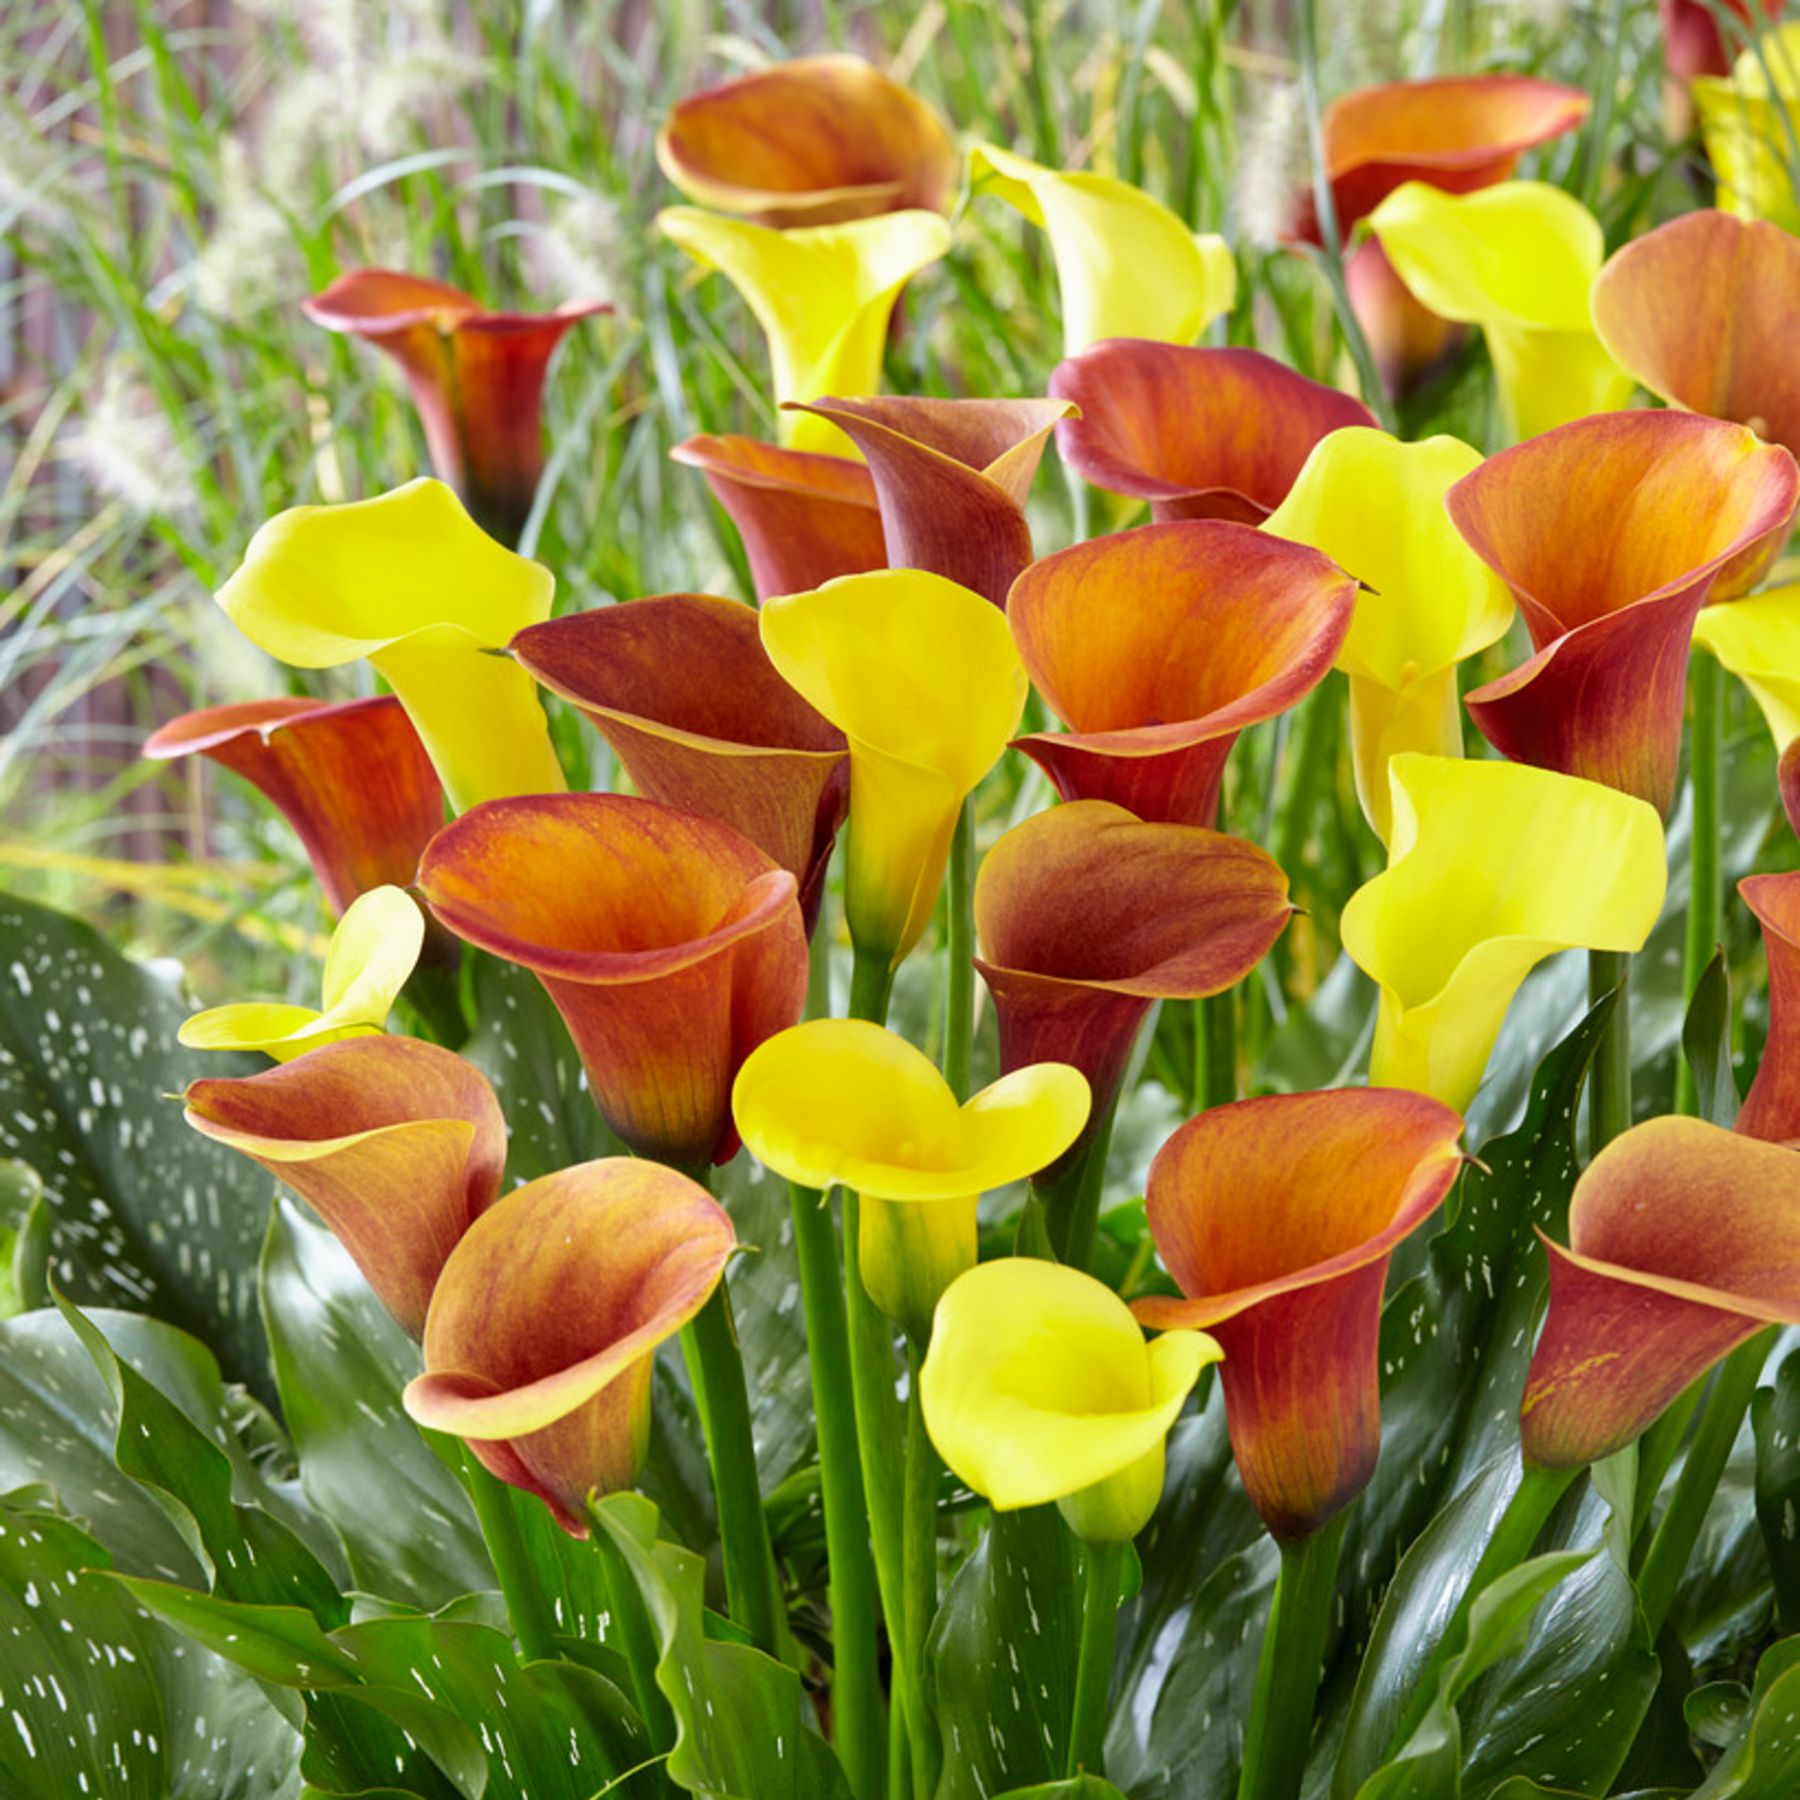 On Fire Calla Lily Mix | Order Mixed Calla Bulbs online - Bulbs Direct